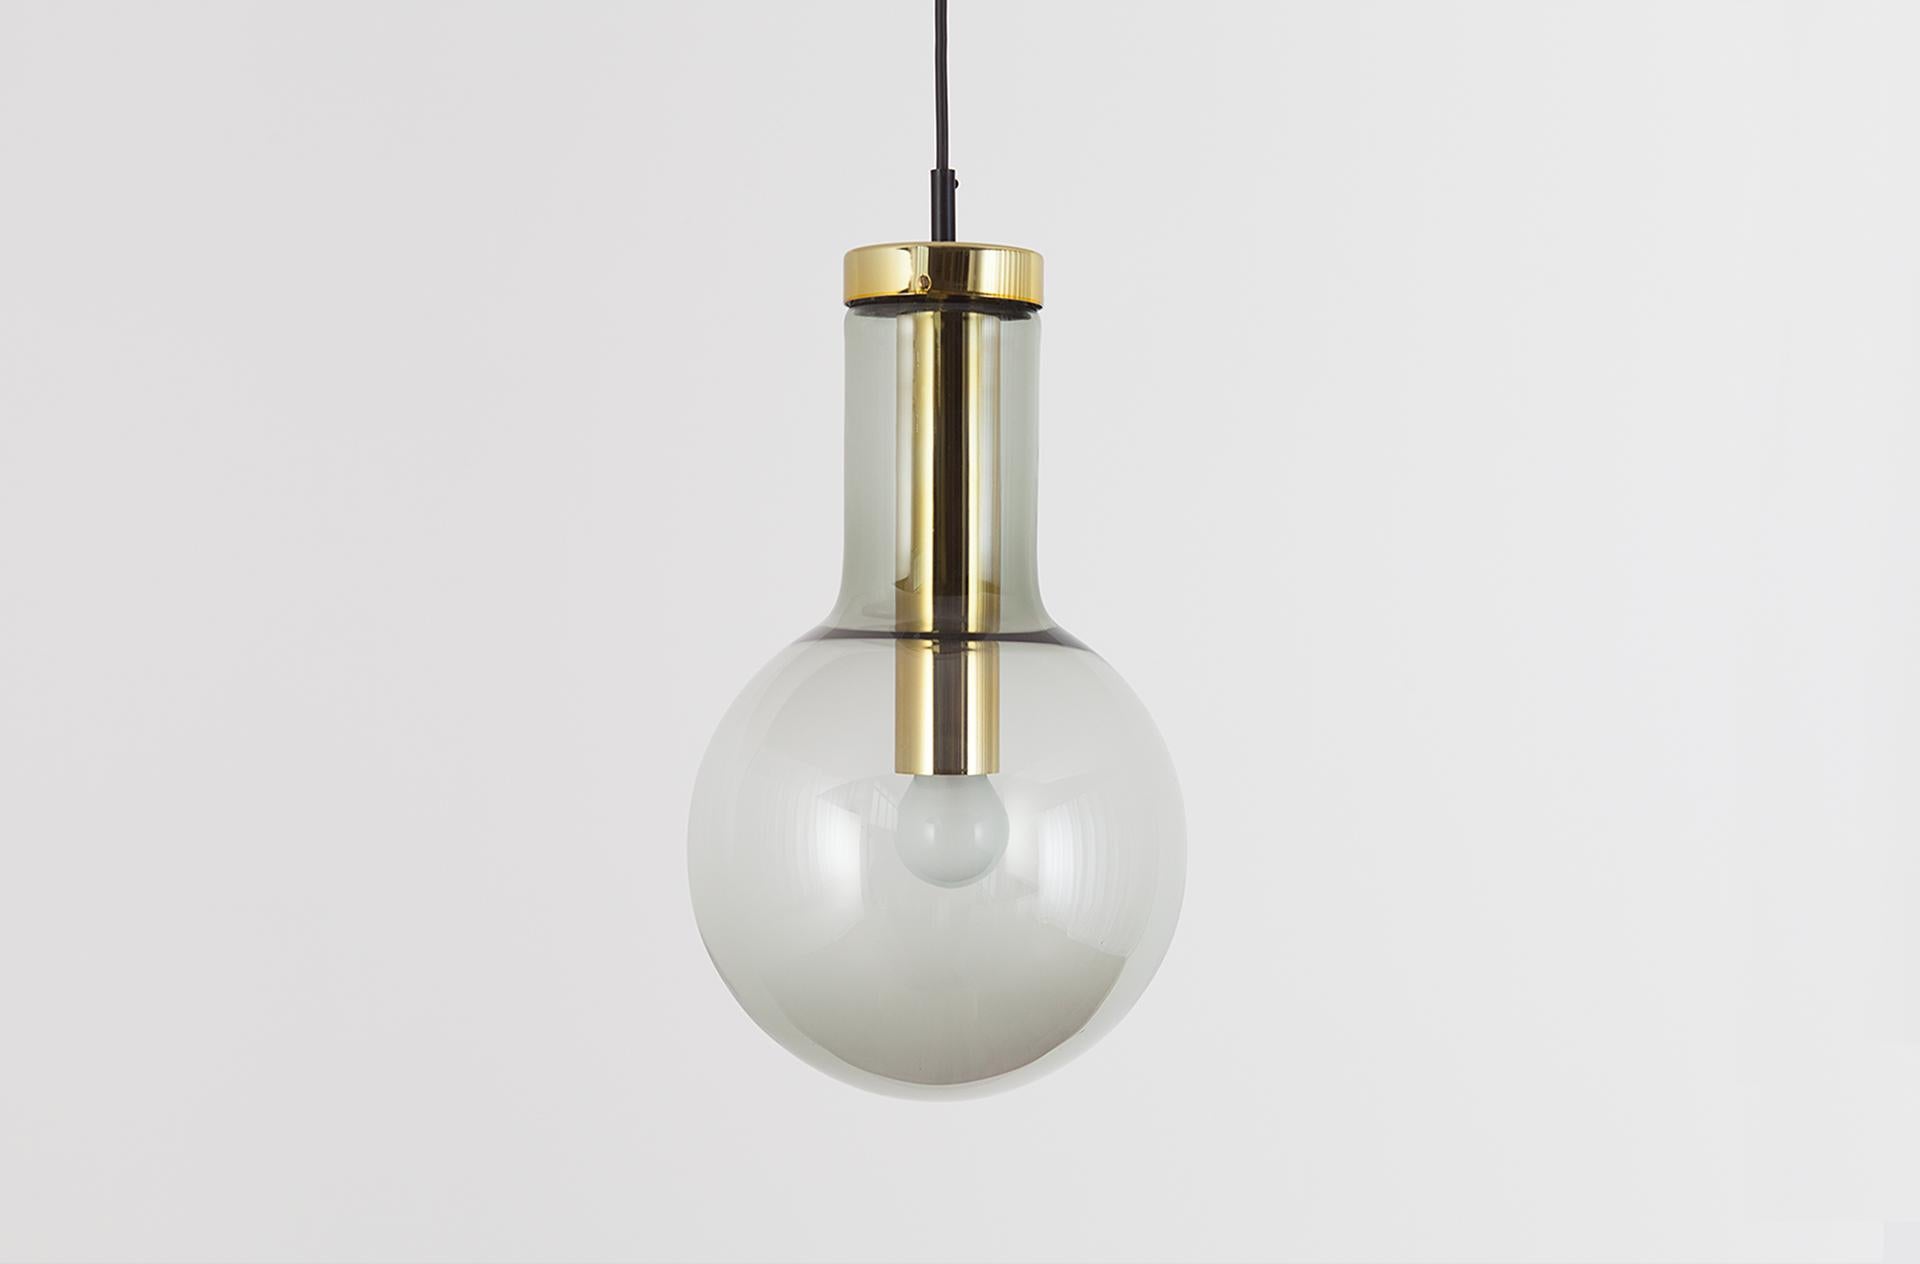 Large size version. Light smoked glass with brass colored metal socket.
 
In the early 1960s, RAAK produced this extraordinary pendant in 3 different sizes, named according to the logic of their striking design. The shape of the pendant -familiar